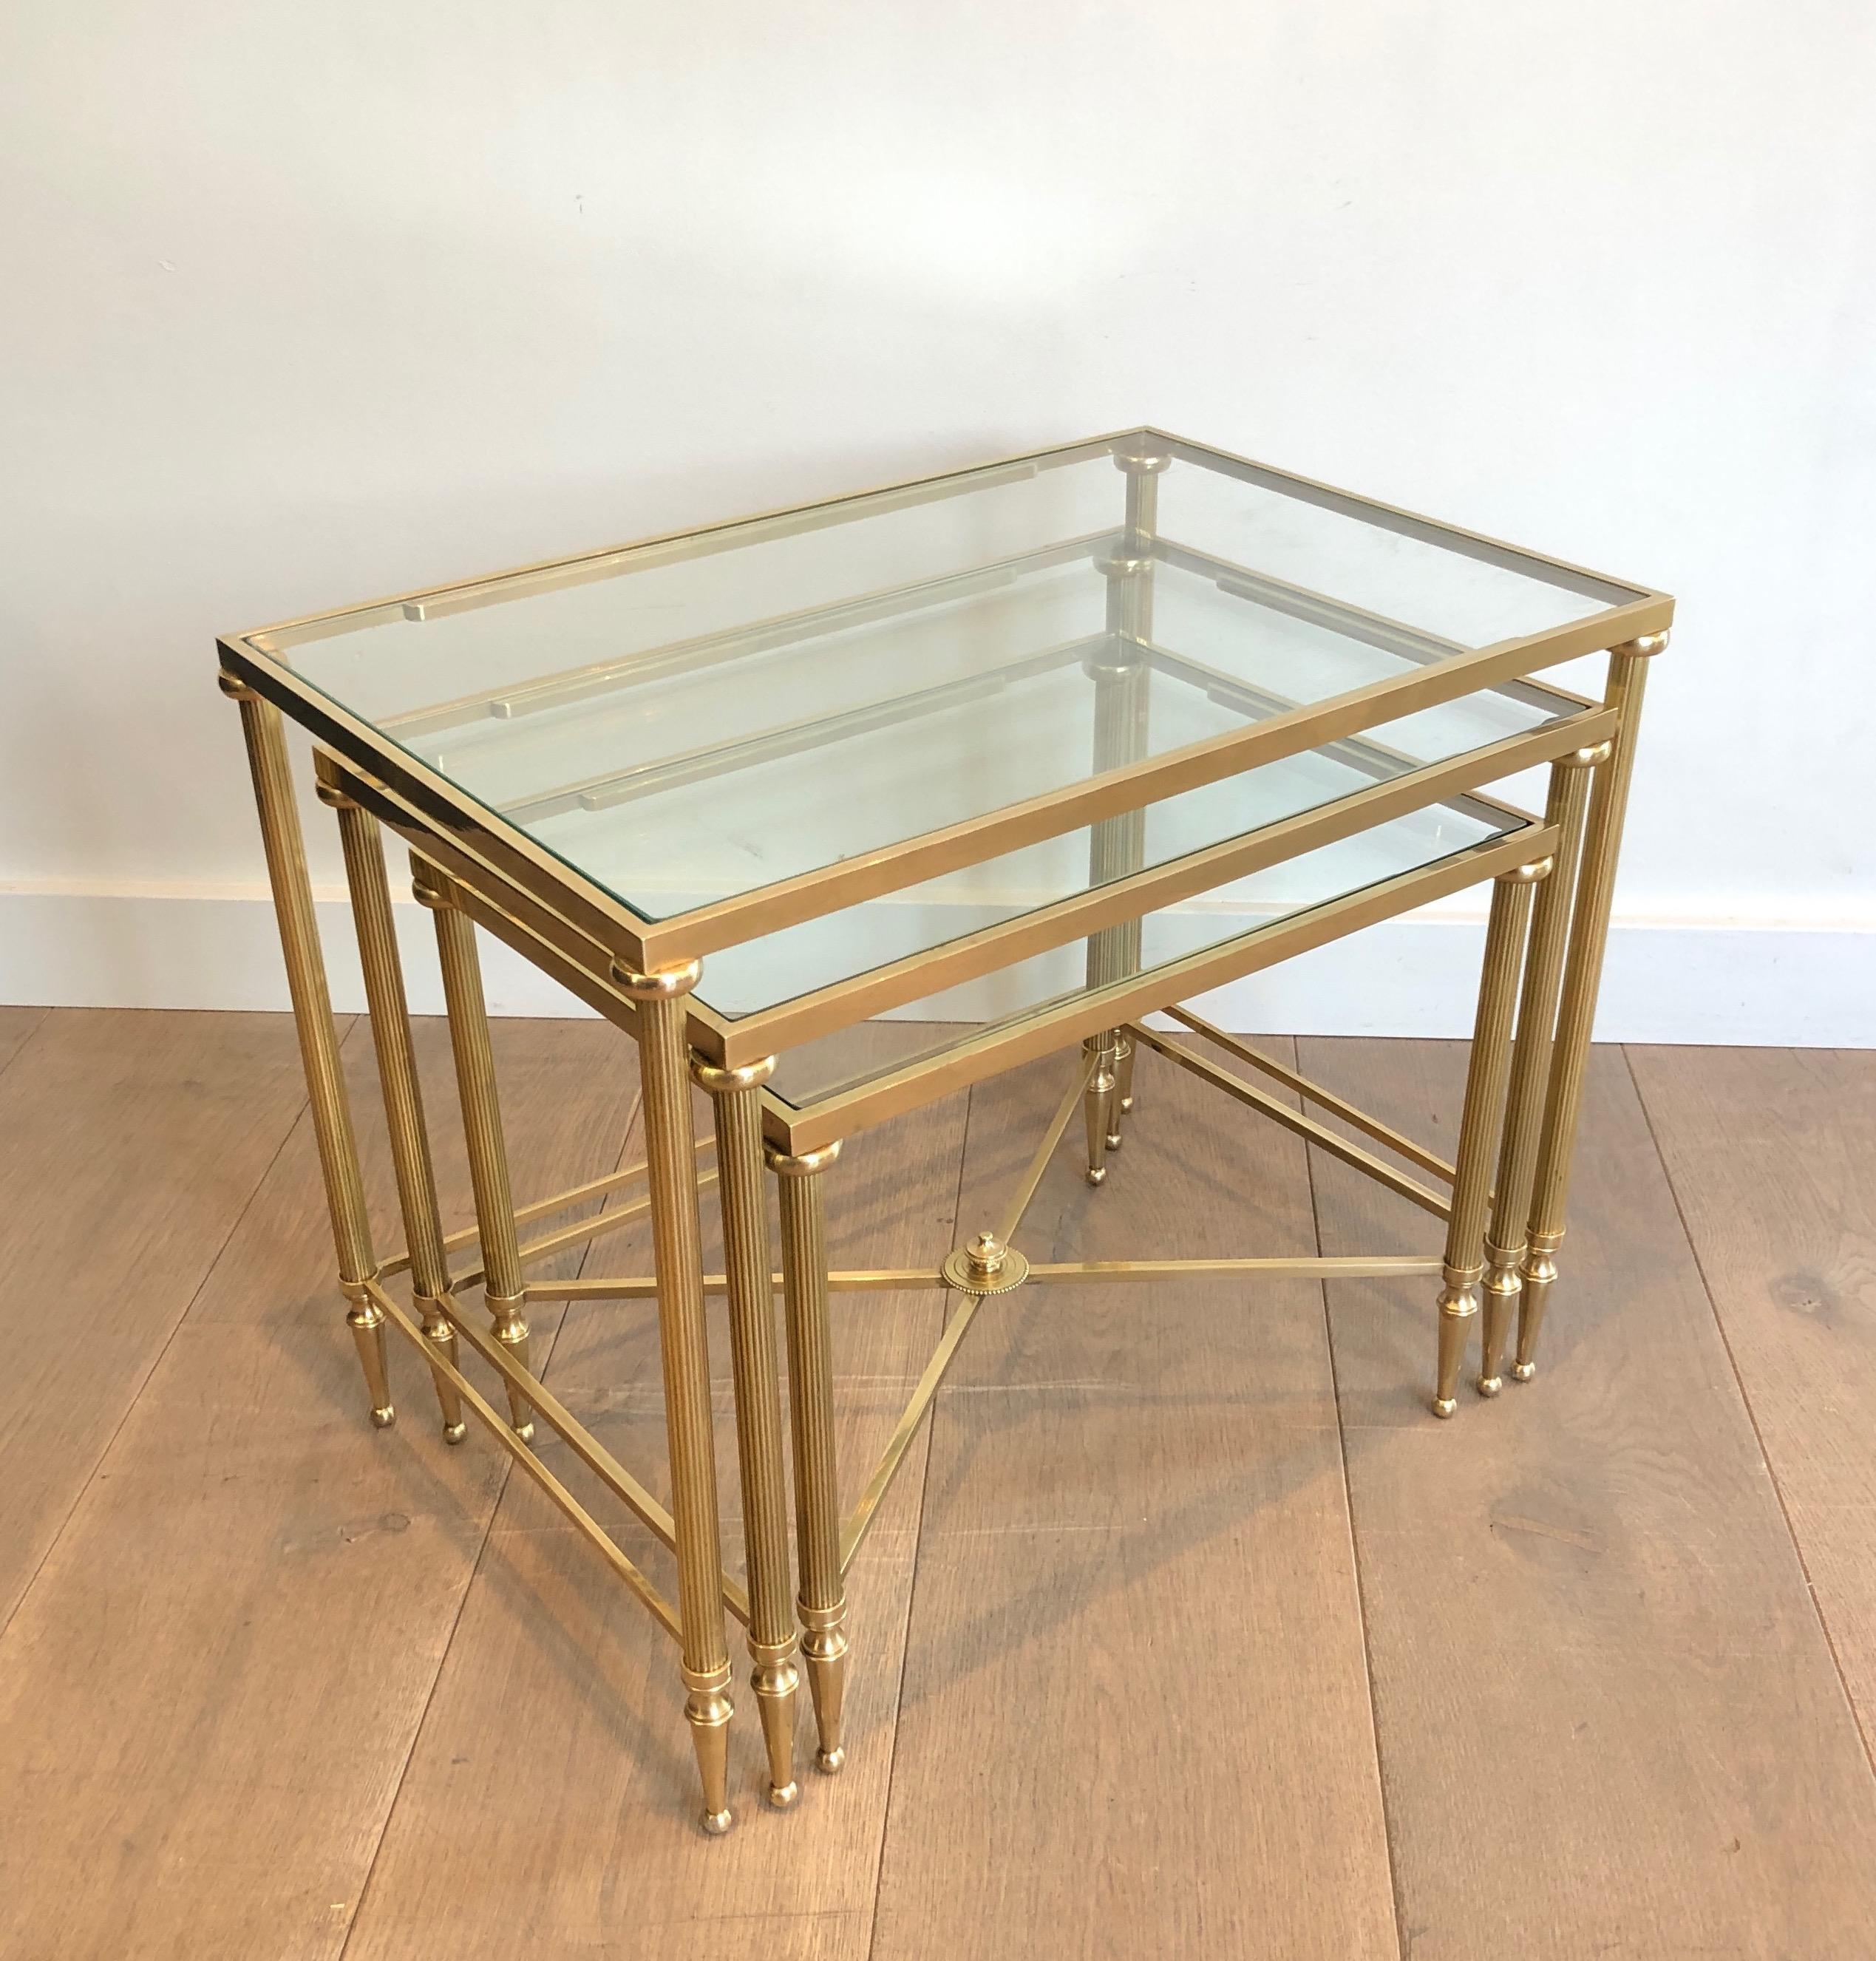 This set of 3 nesting tables is made of brass and glass. This is a work by famous French designer Maison Jansen, circa 1940.